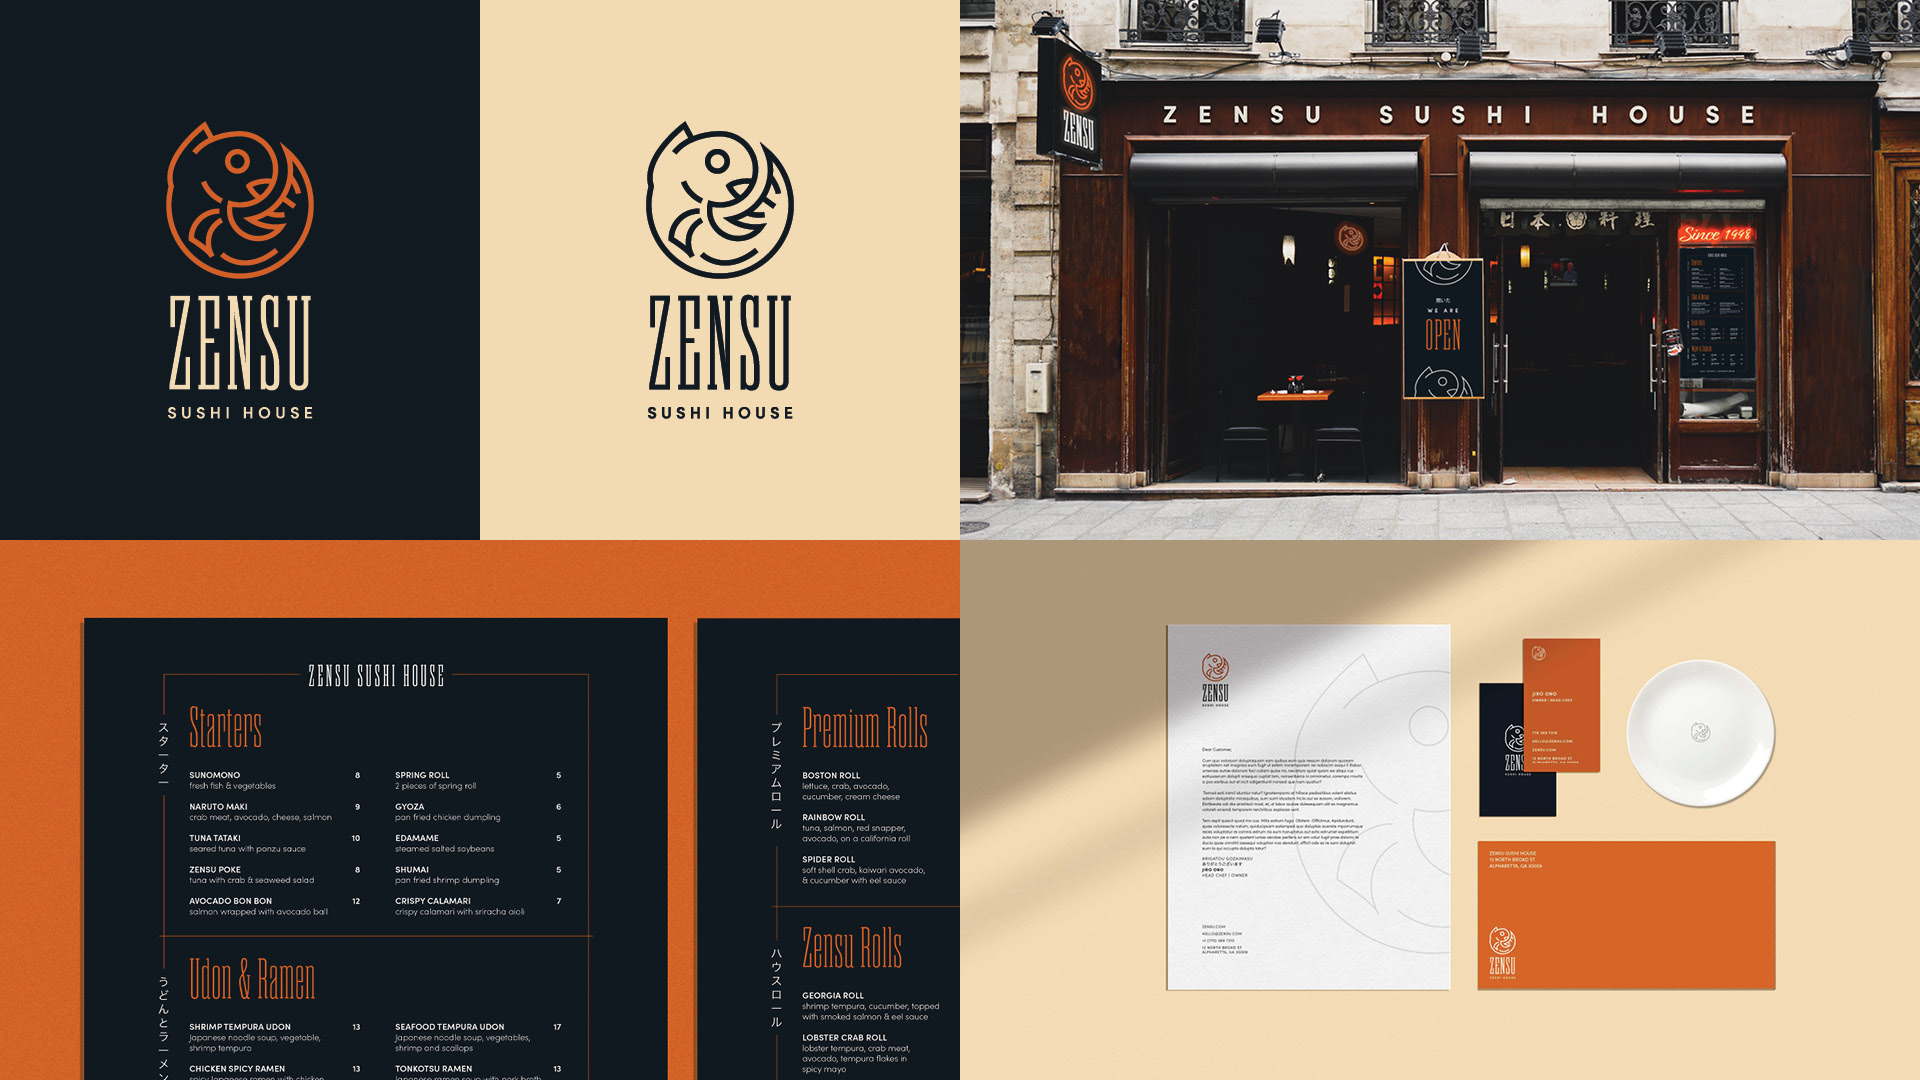  / “Zensu Sushi House” Restaurant brand design, 2021. Zensu Sushi House operates at the intersection of food and friendship to deliver traditionally crafted sushi with a welcoming, community-driven dining experience.